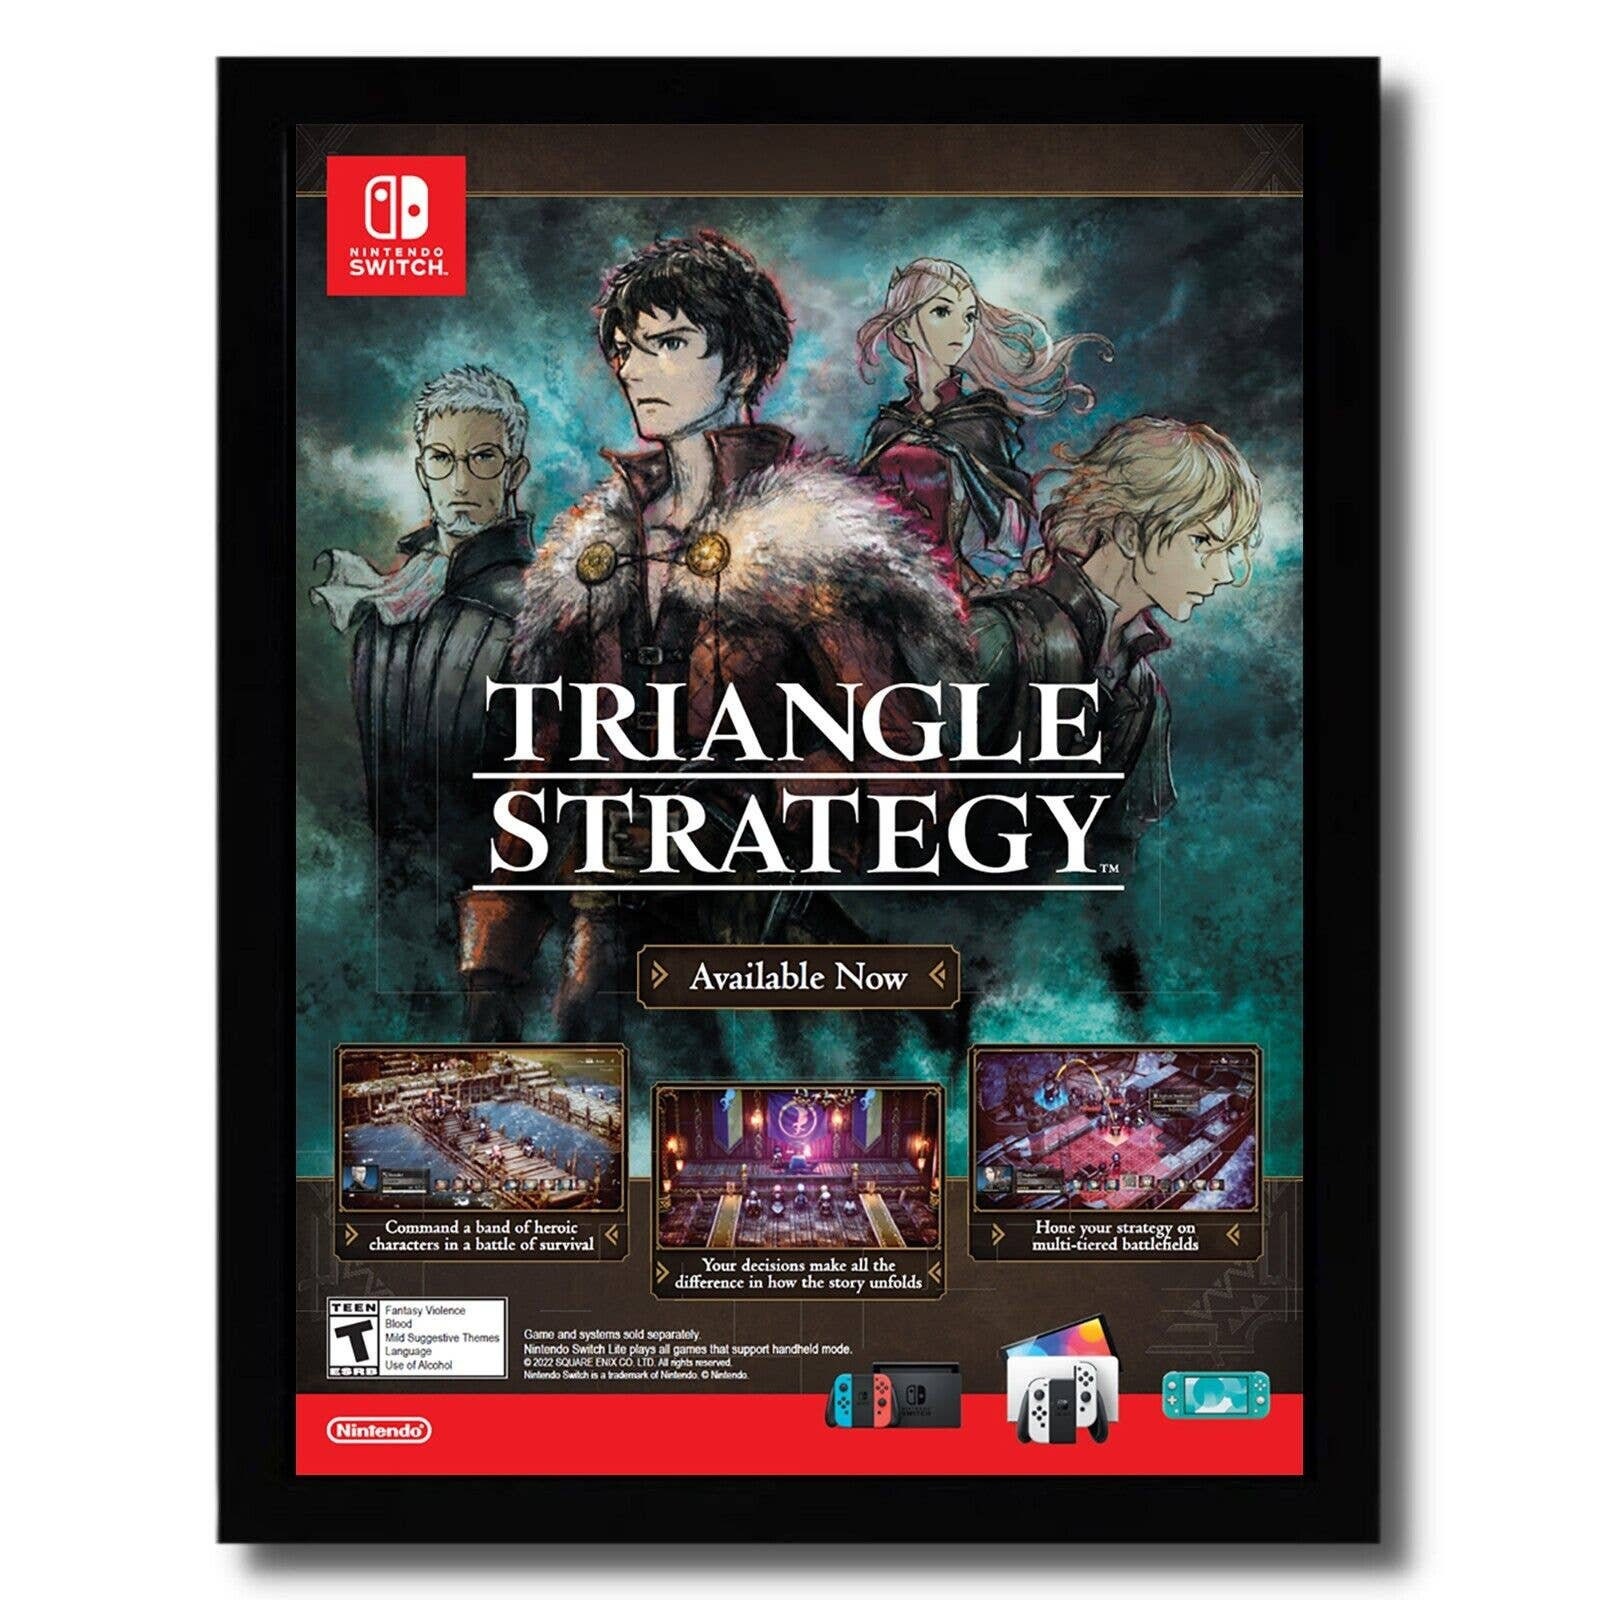 2022 Triangle Strategy Framed Print Ad/poster Nintendo Switch RPG Game  Promo Art - Etsy